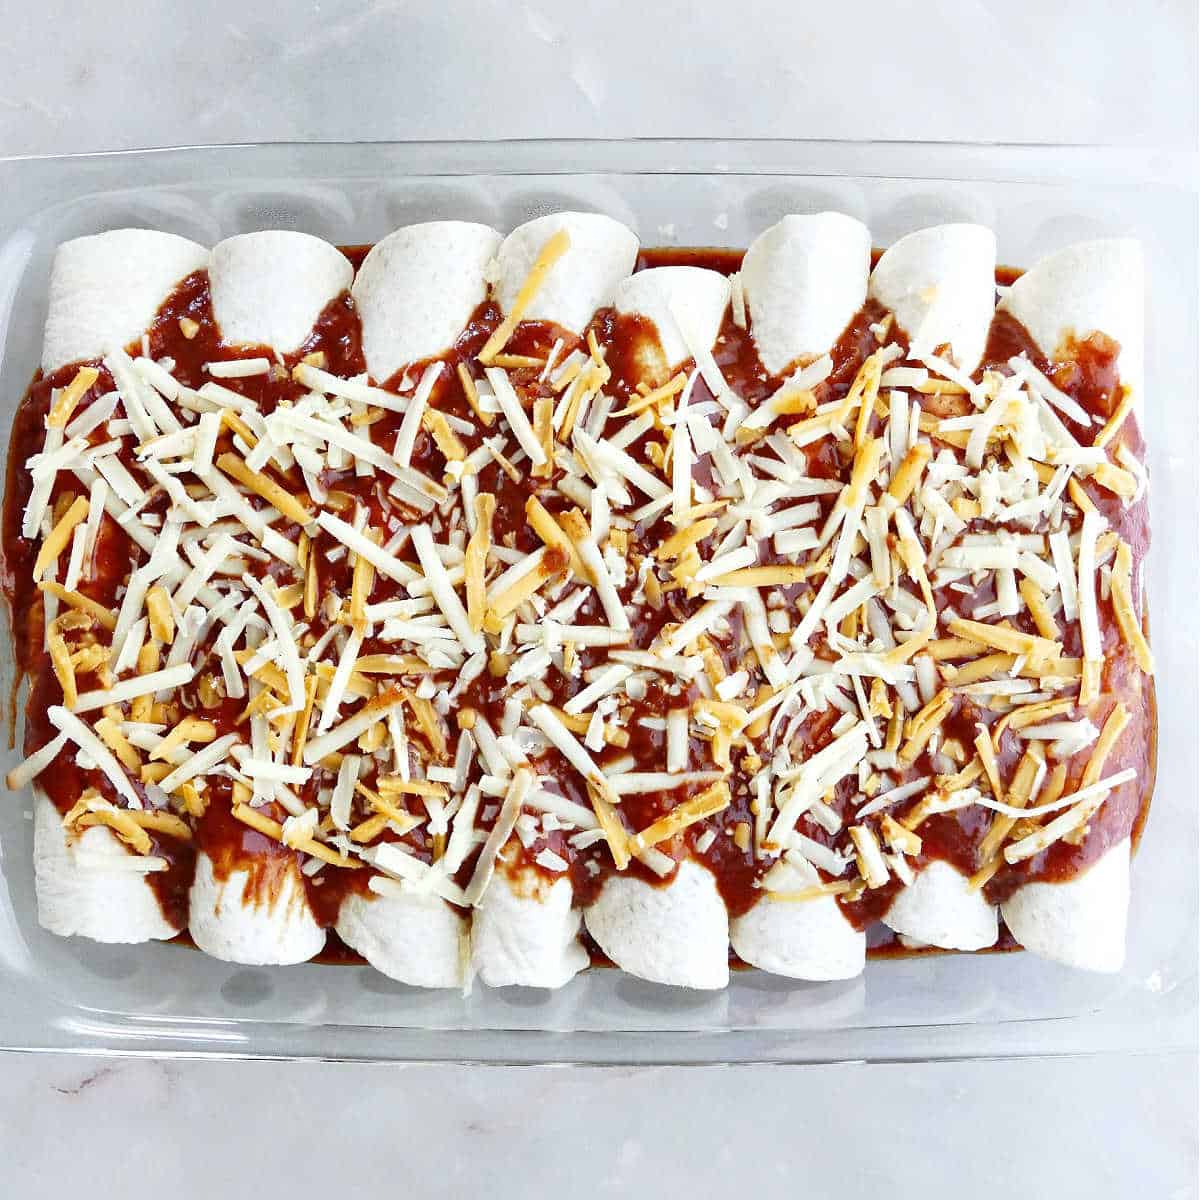 enchiladas covered with sauce and shredded cheese in a baking dish before being baked